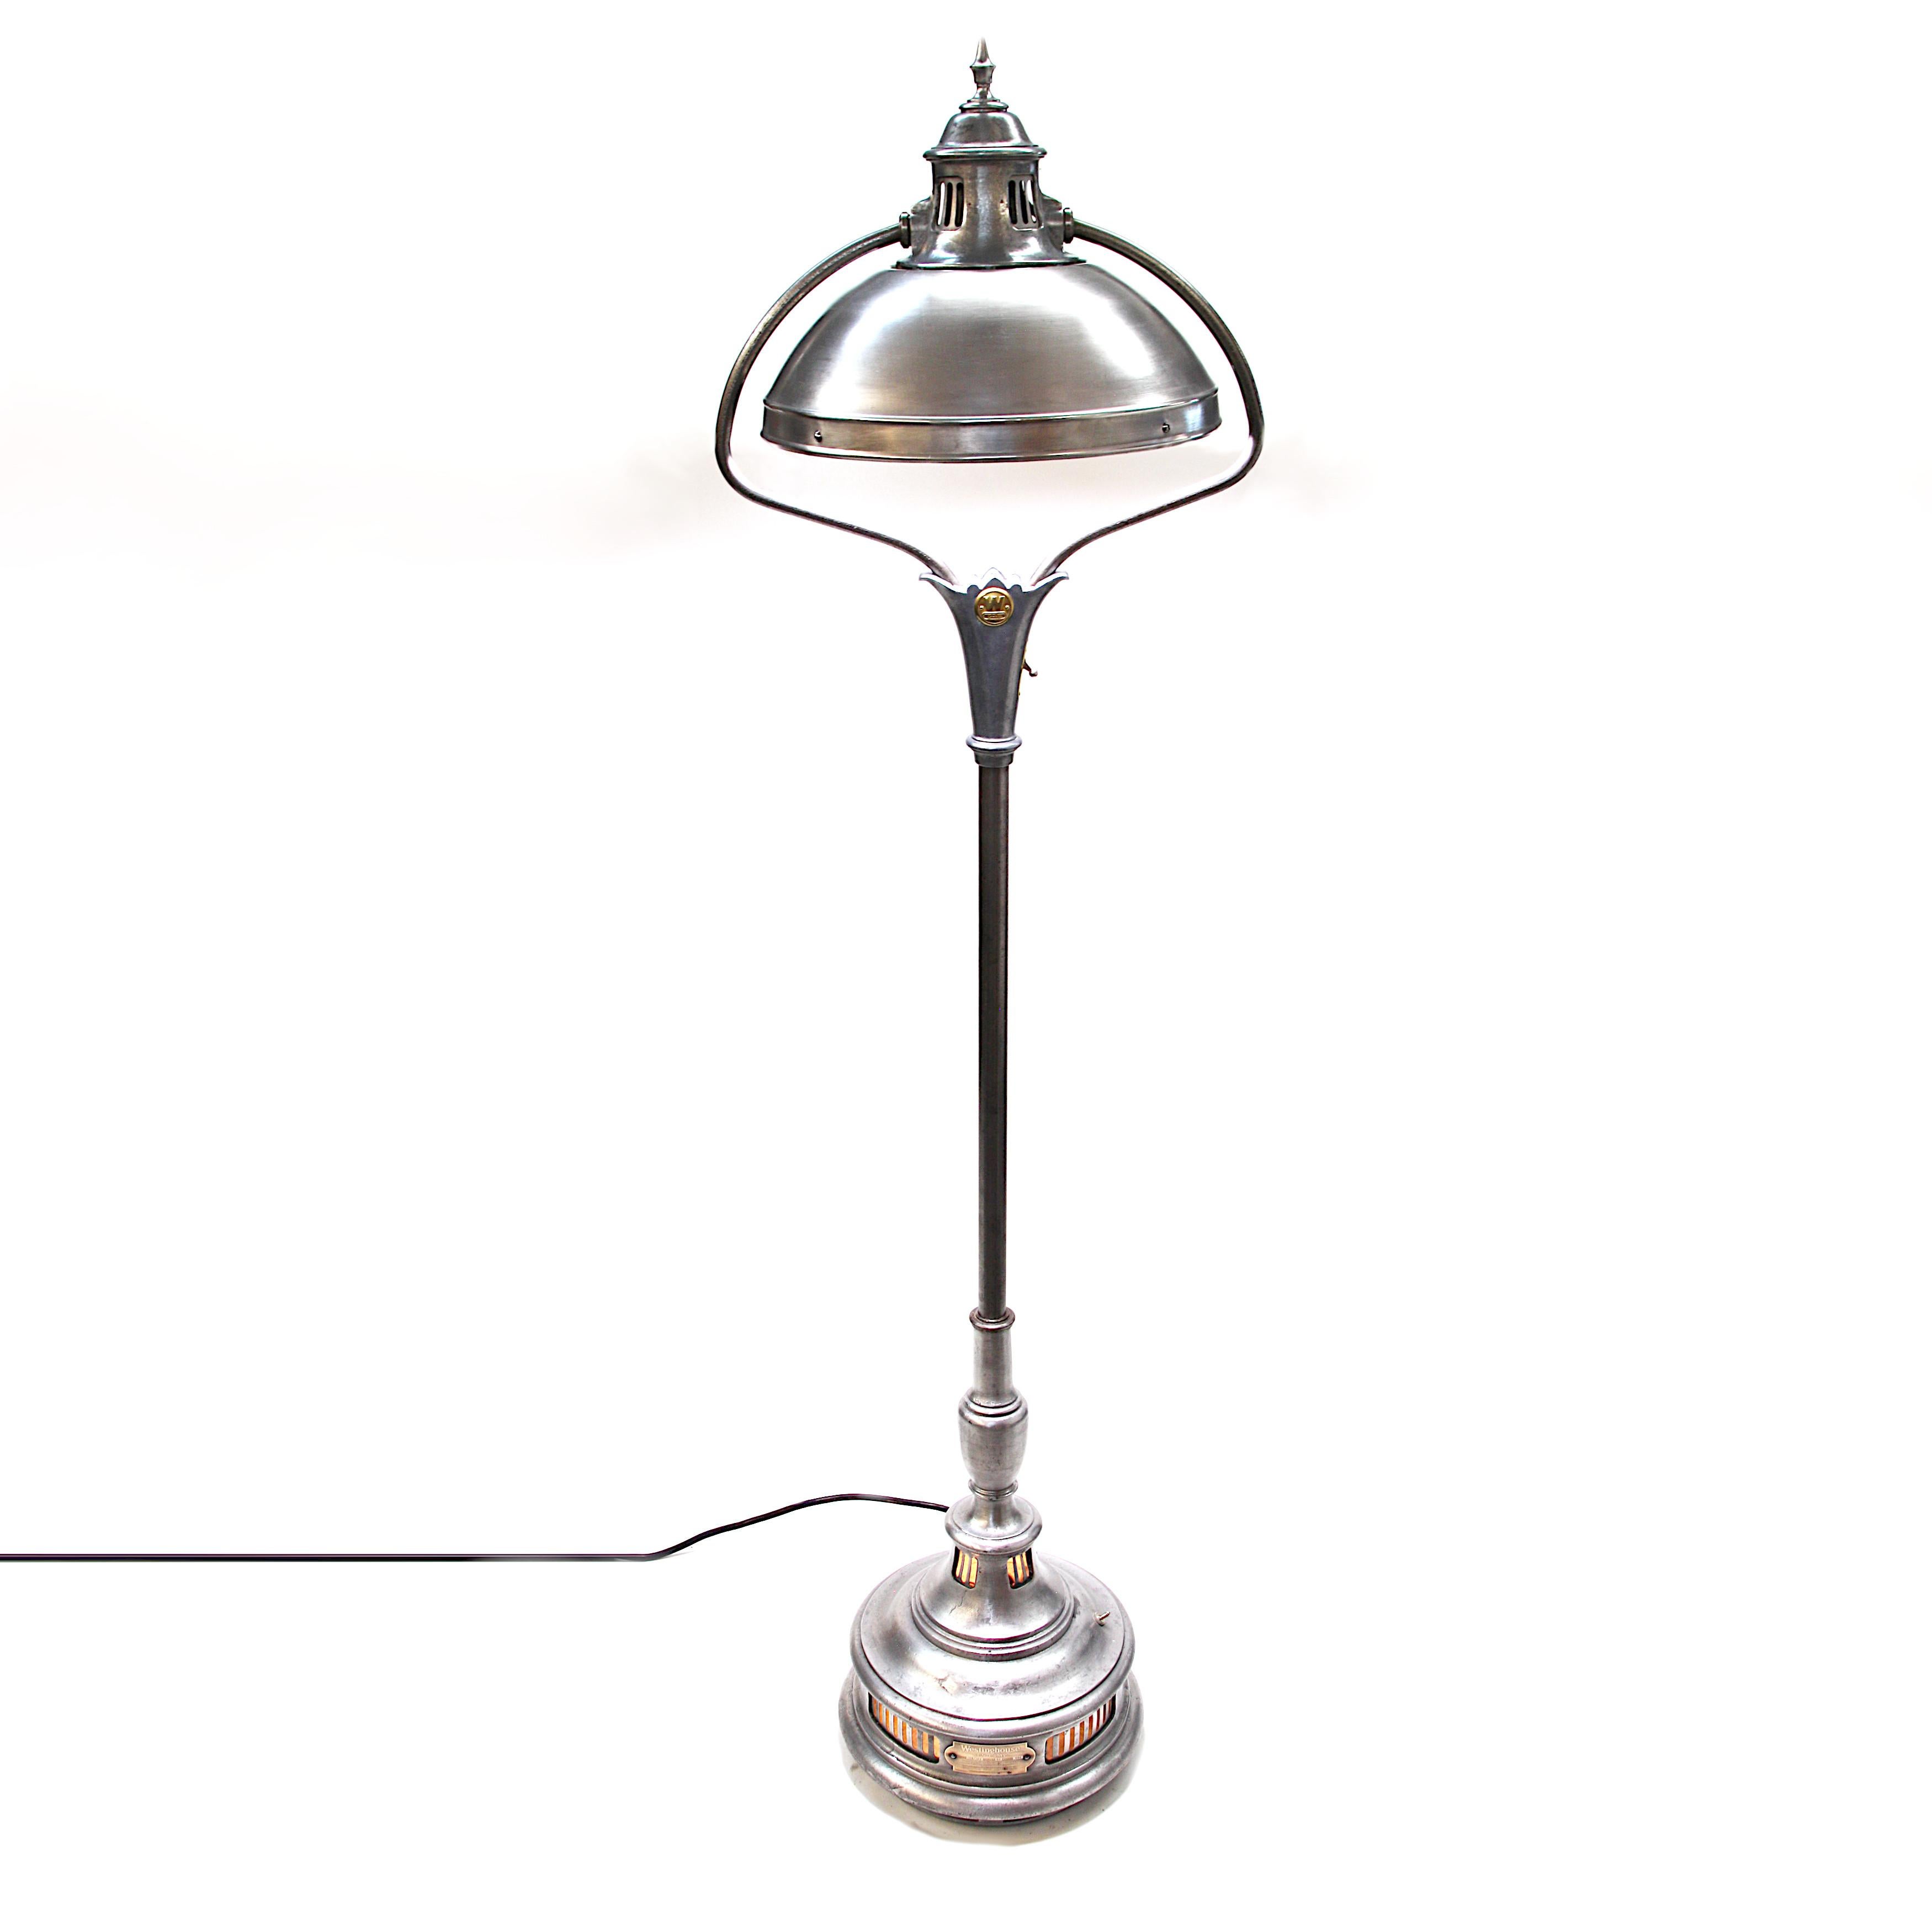 This rare and wonderful floor lamp began life as a 1930s GE Sunlamp, a device that claimed no true therapeutic or medical benefits but stated its purpose as a rather questionable 